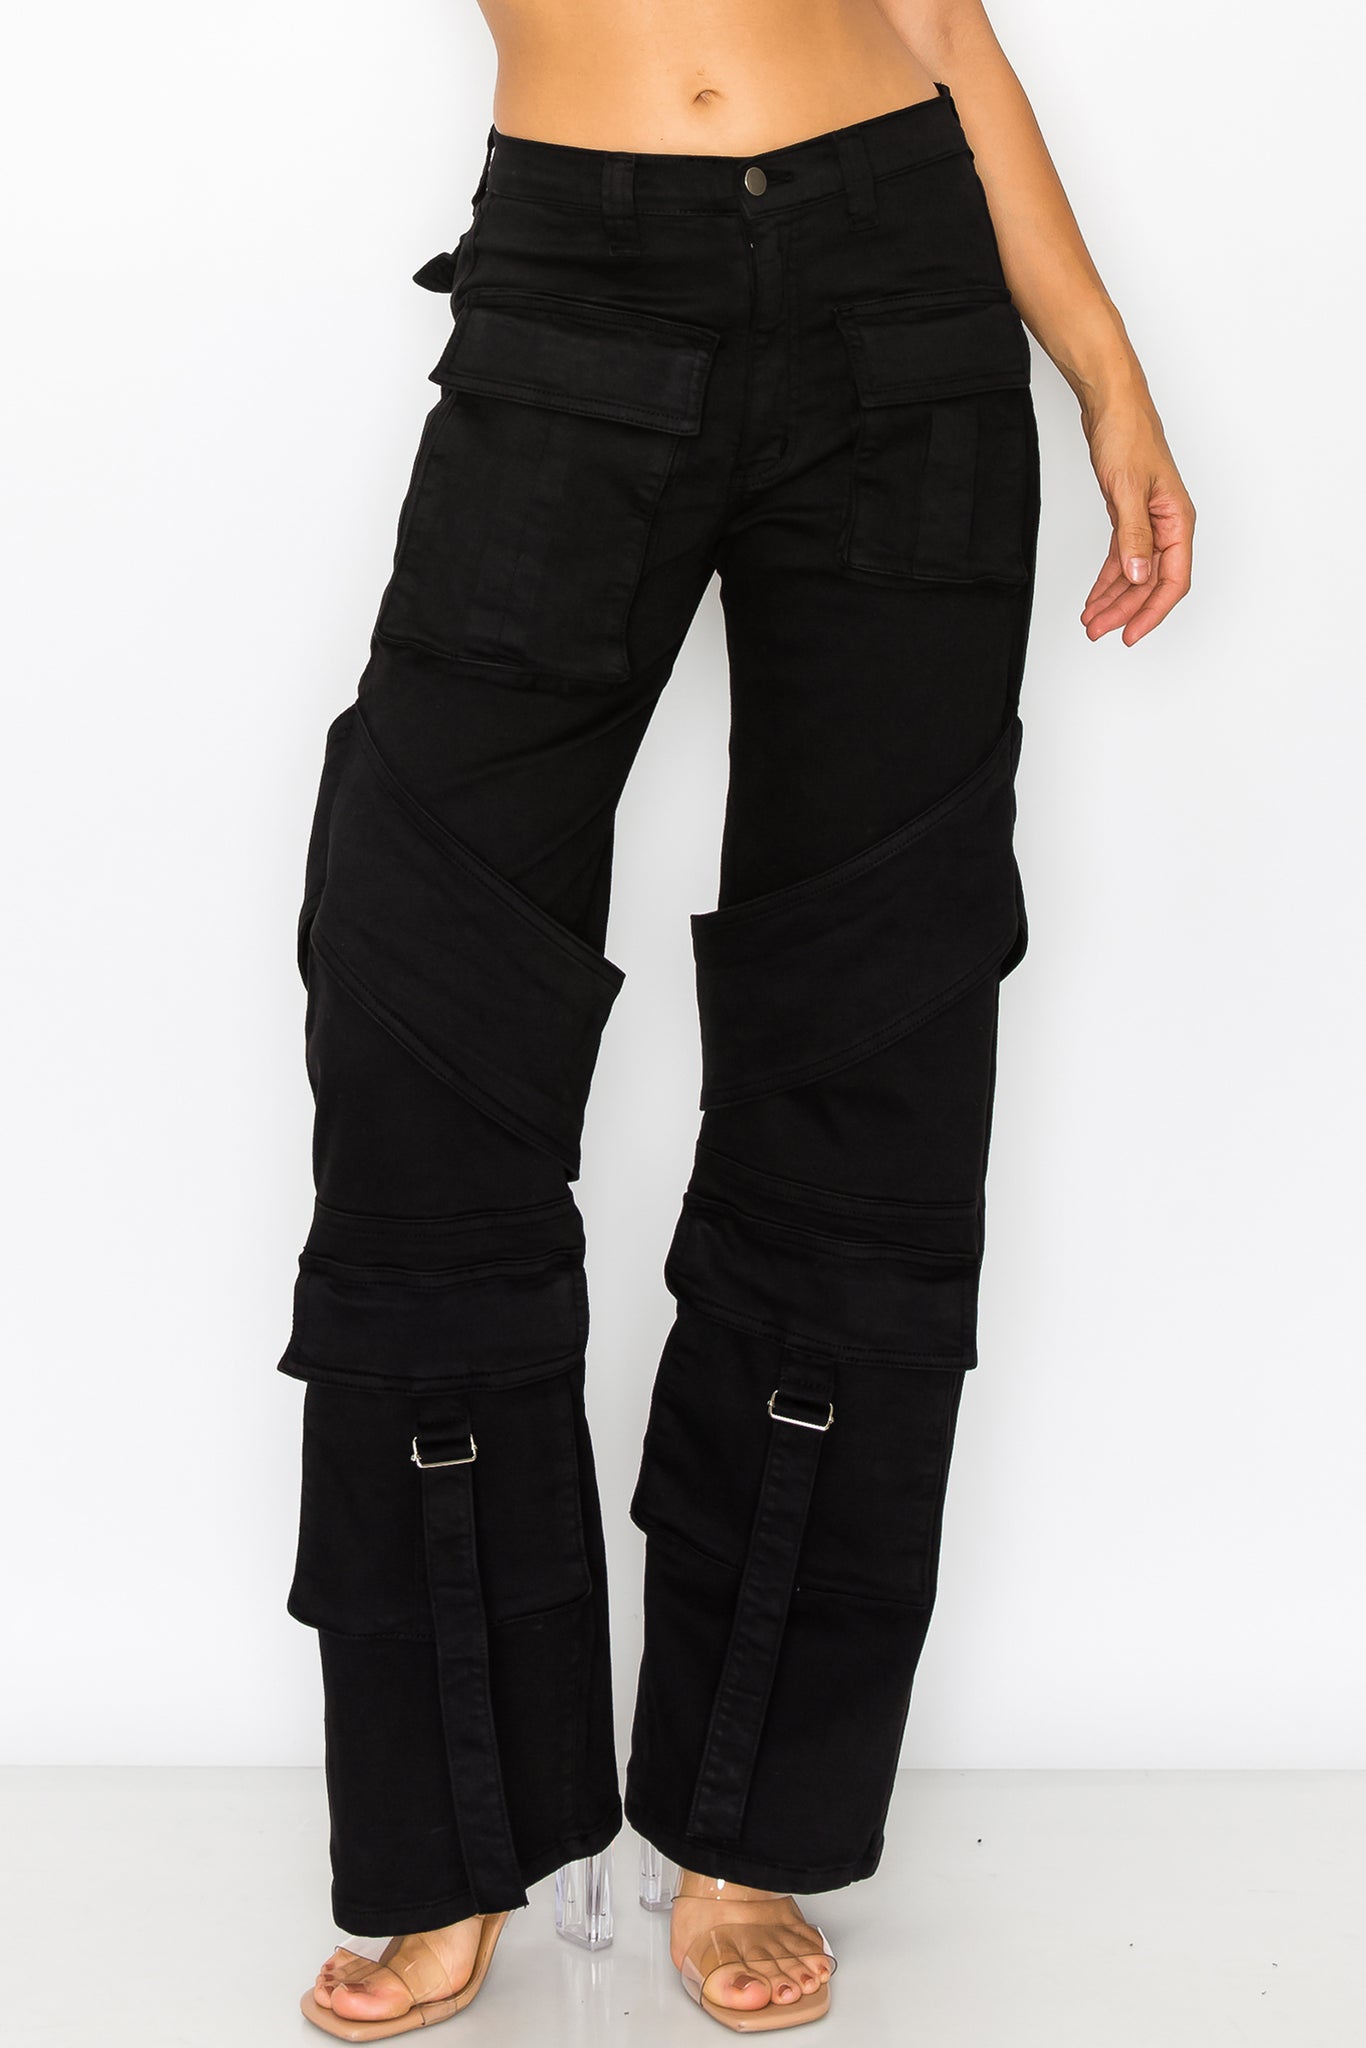 40480 Women's High Rise Cargo Pants with Pockets Classic fit Casual Denim